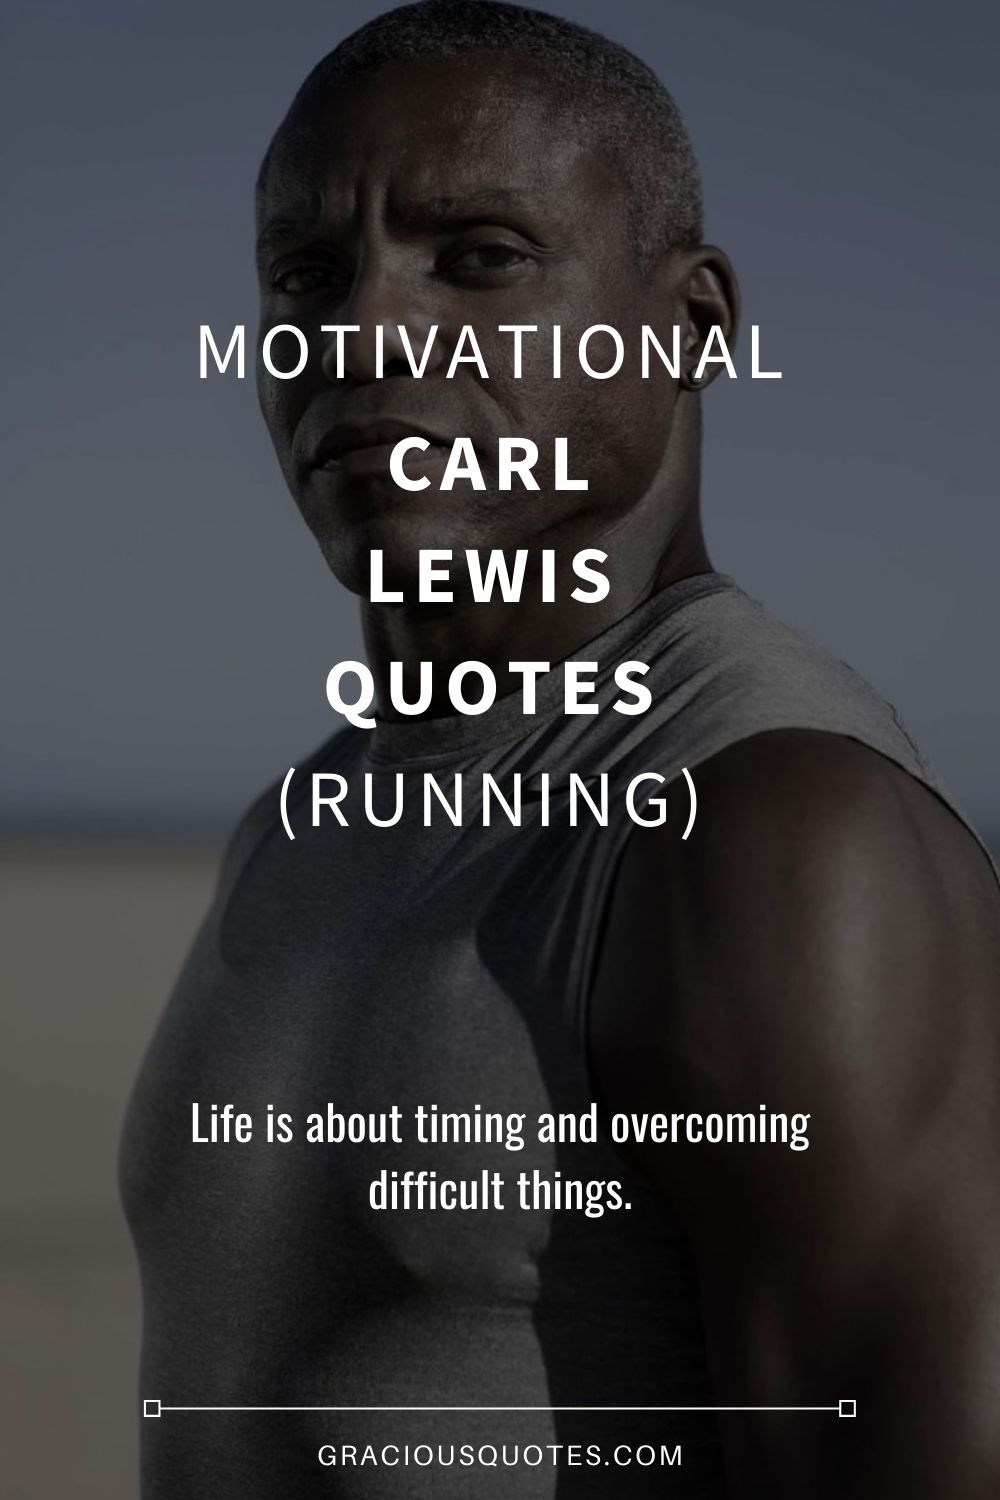 Motivational Carl Lewis Quotes (RUNNING) - Gracious Quotes